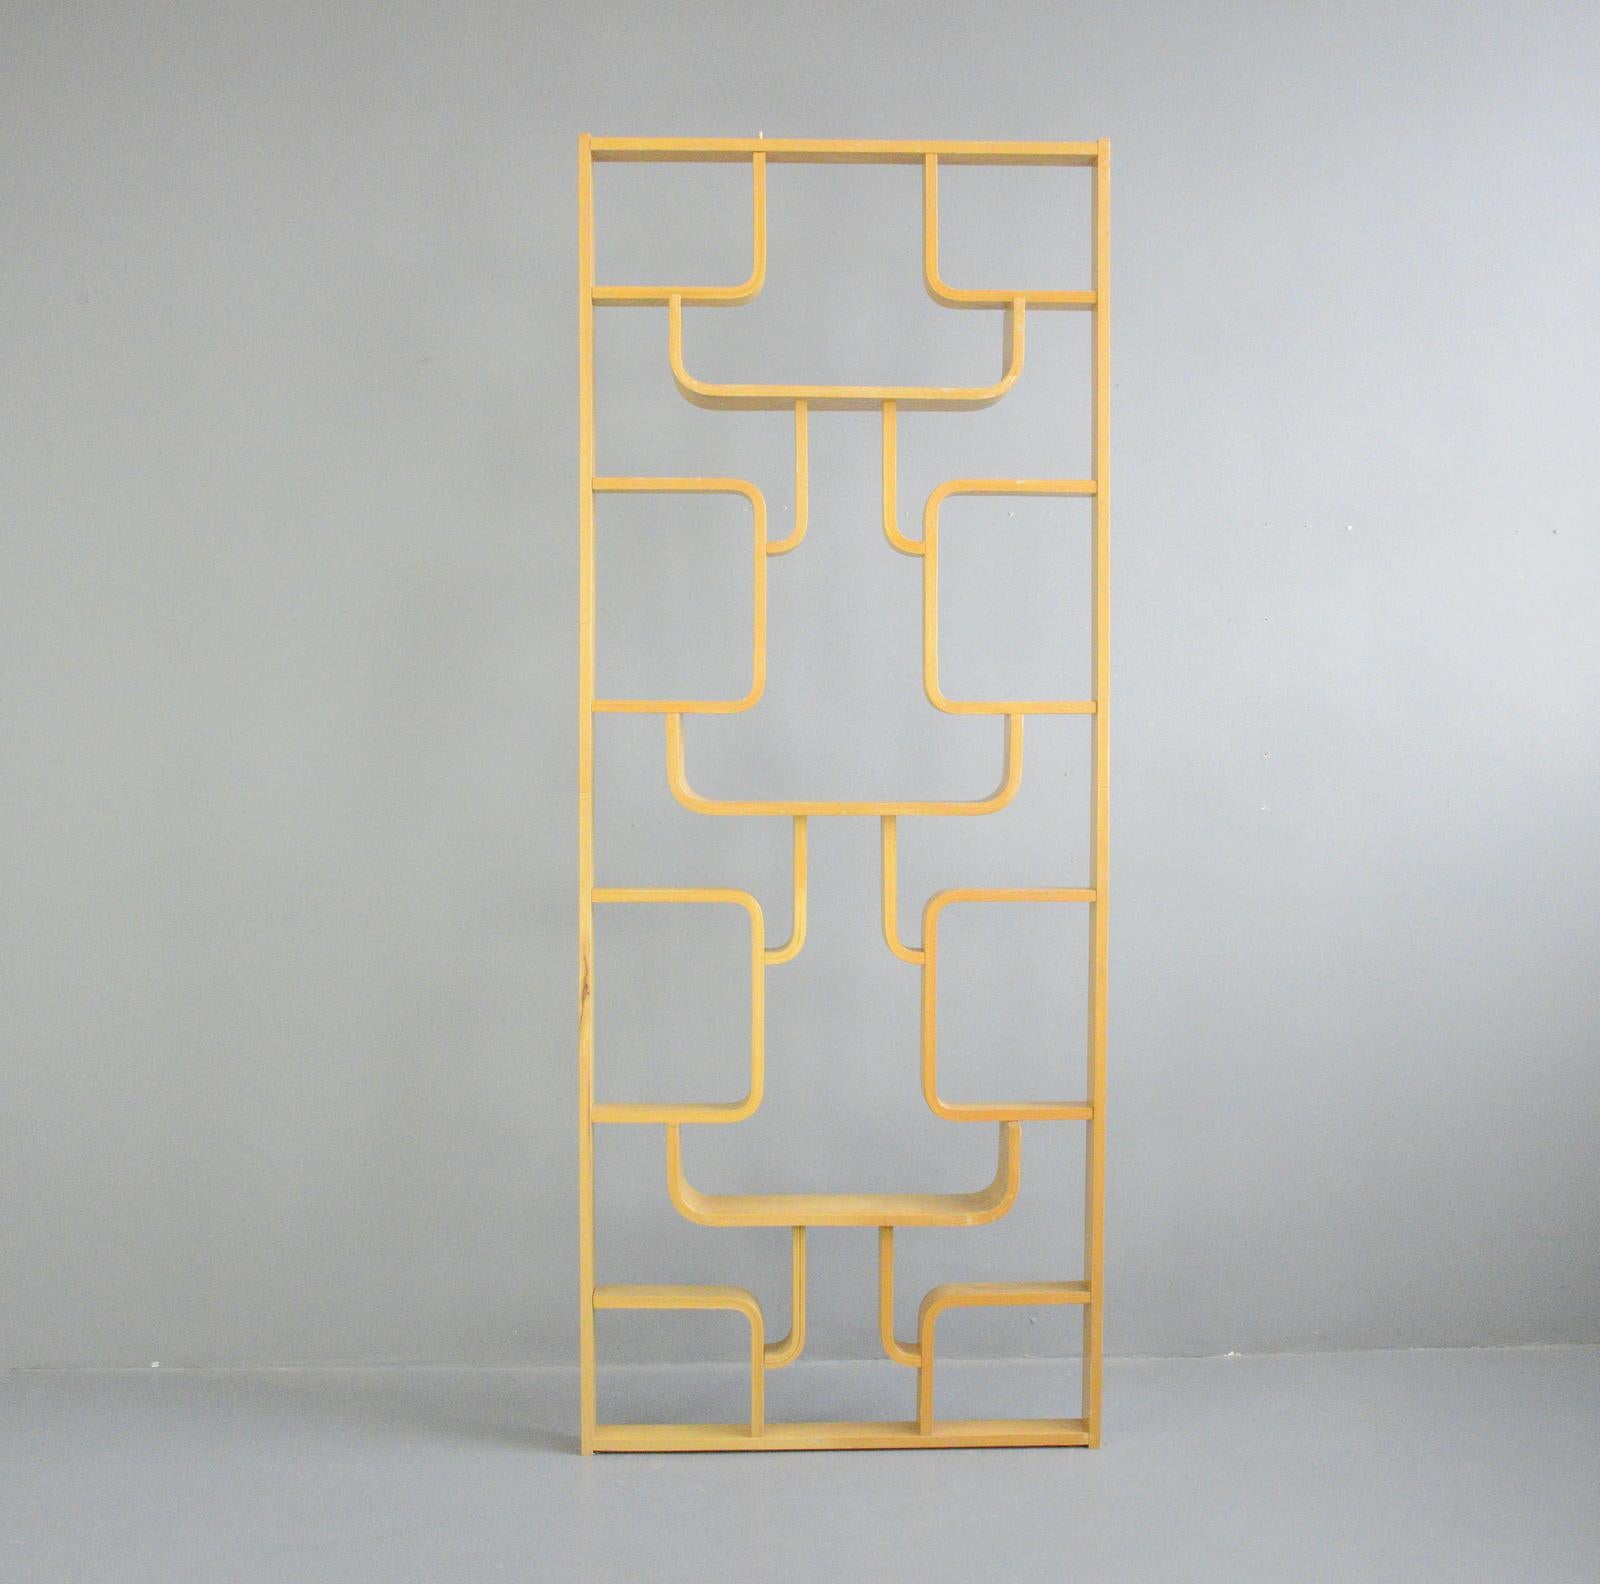 Mid century room divider by Ludvik Volak, Circa 1960s

- Made from curved beech
- Designed by Ludvik Volak
- Produced by Drevopodnik Holesov
- Czech ~ 1960s
- 225cm tall x 91cm wide x 16cm deep

Condition Report

Some age marks and ring